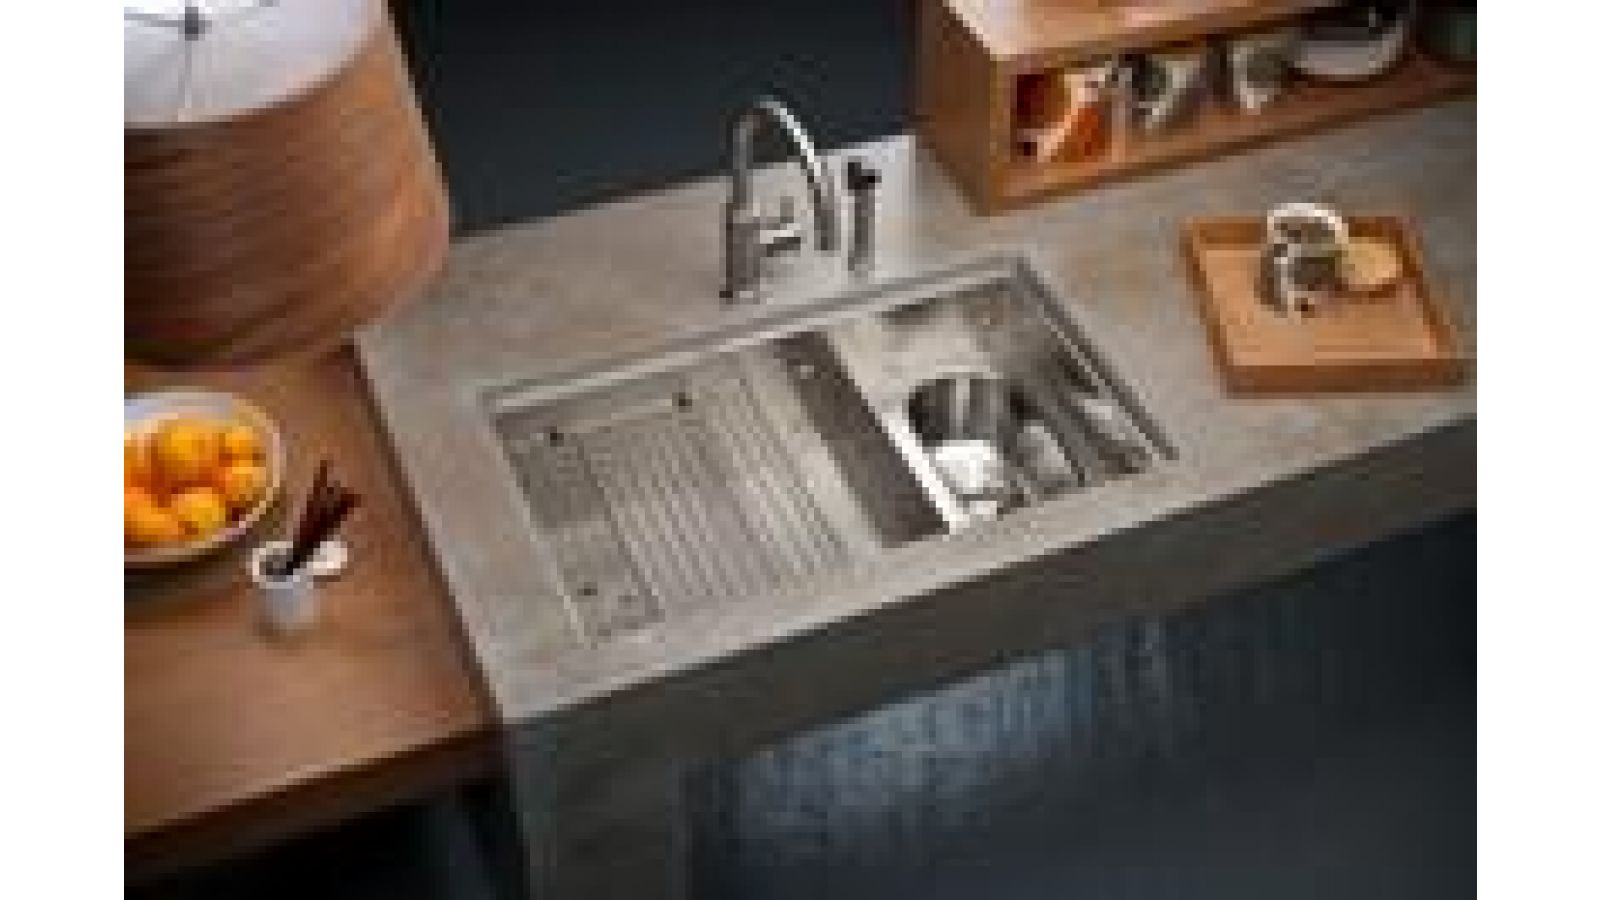 Cascade Compact Sink by Fu-Tung Cheng